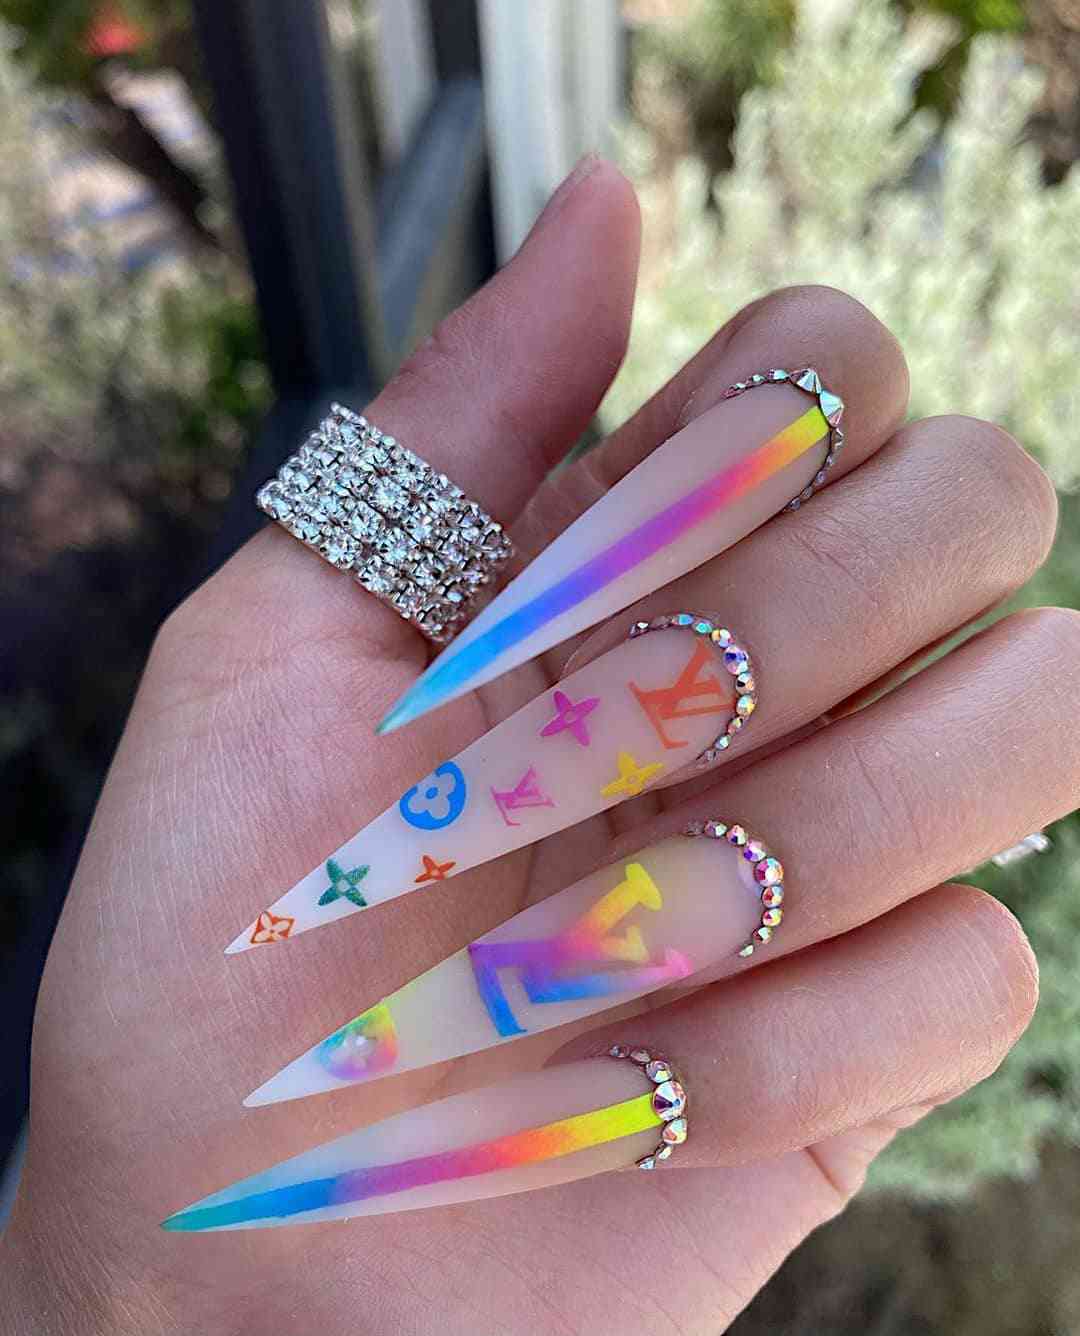 50 Best Nail Designs Trends To Try Out In 2022 images 7